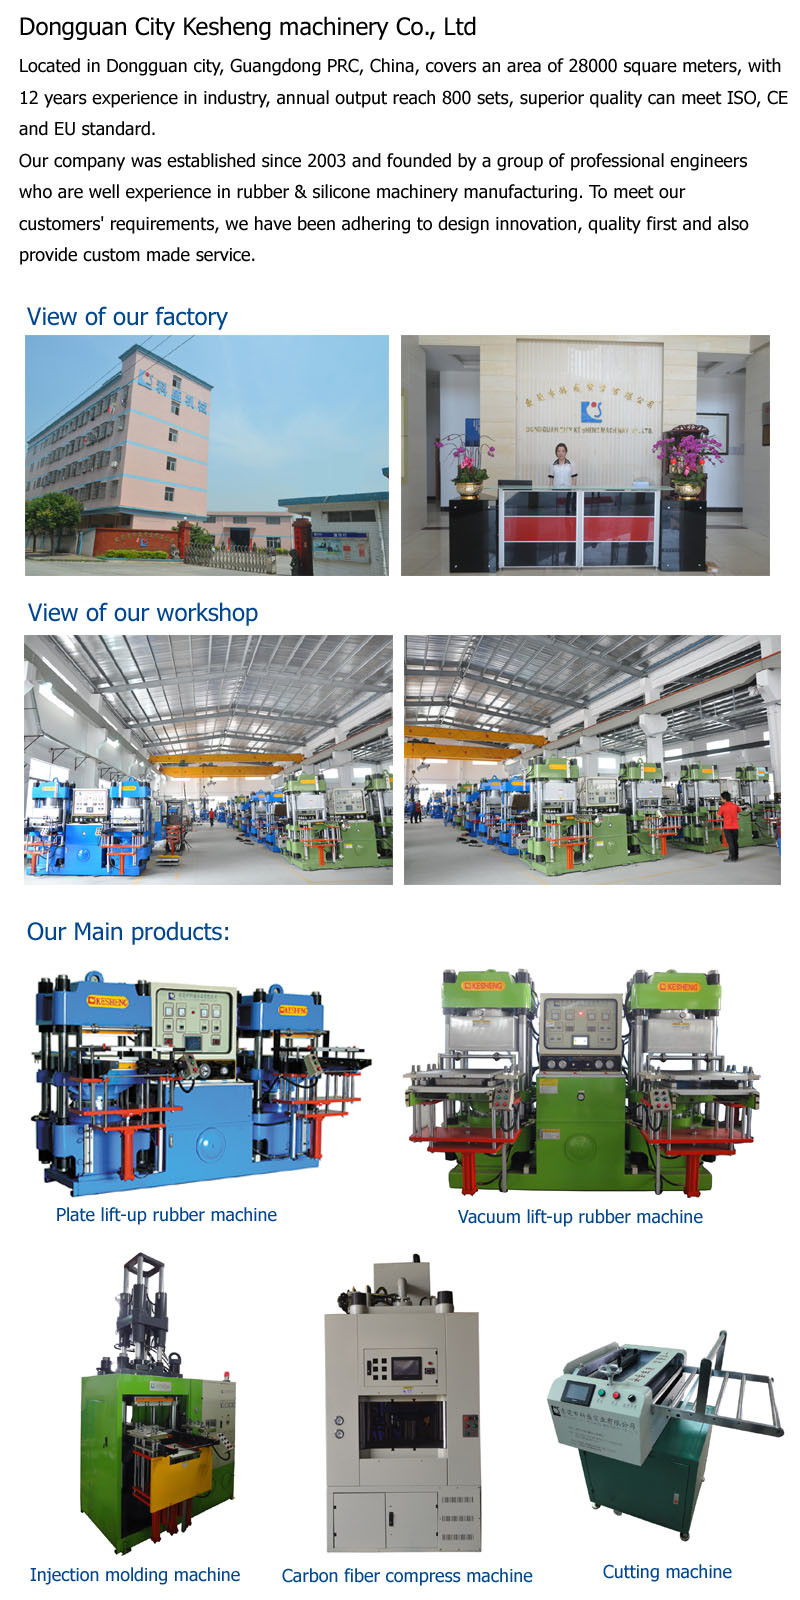 Hydraulic Hot Press Rubber Machine for Rubber Silicone Products (KS300HF)